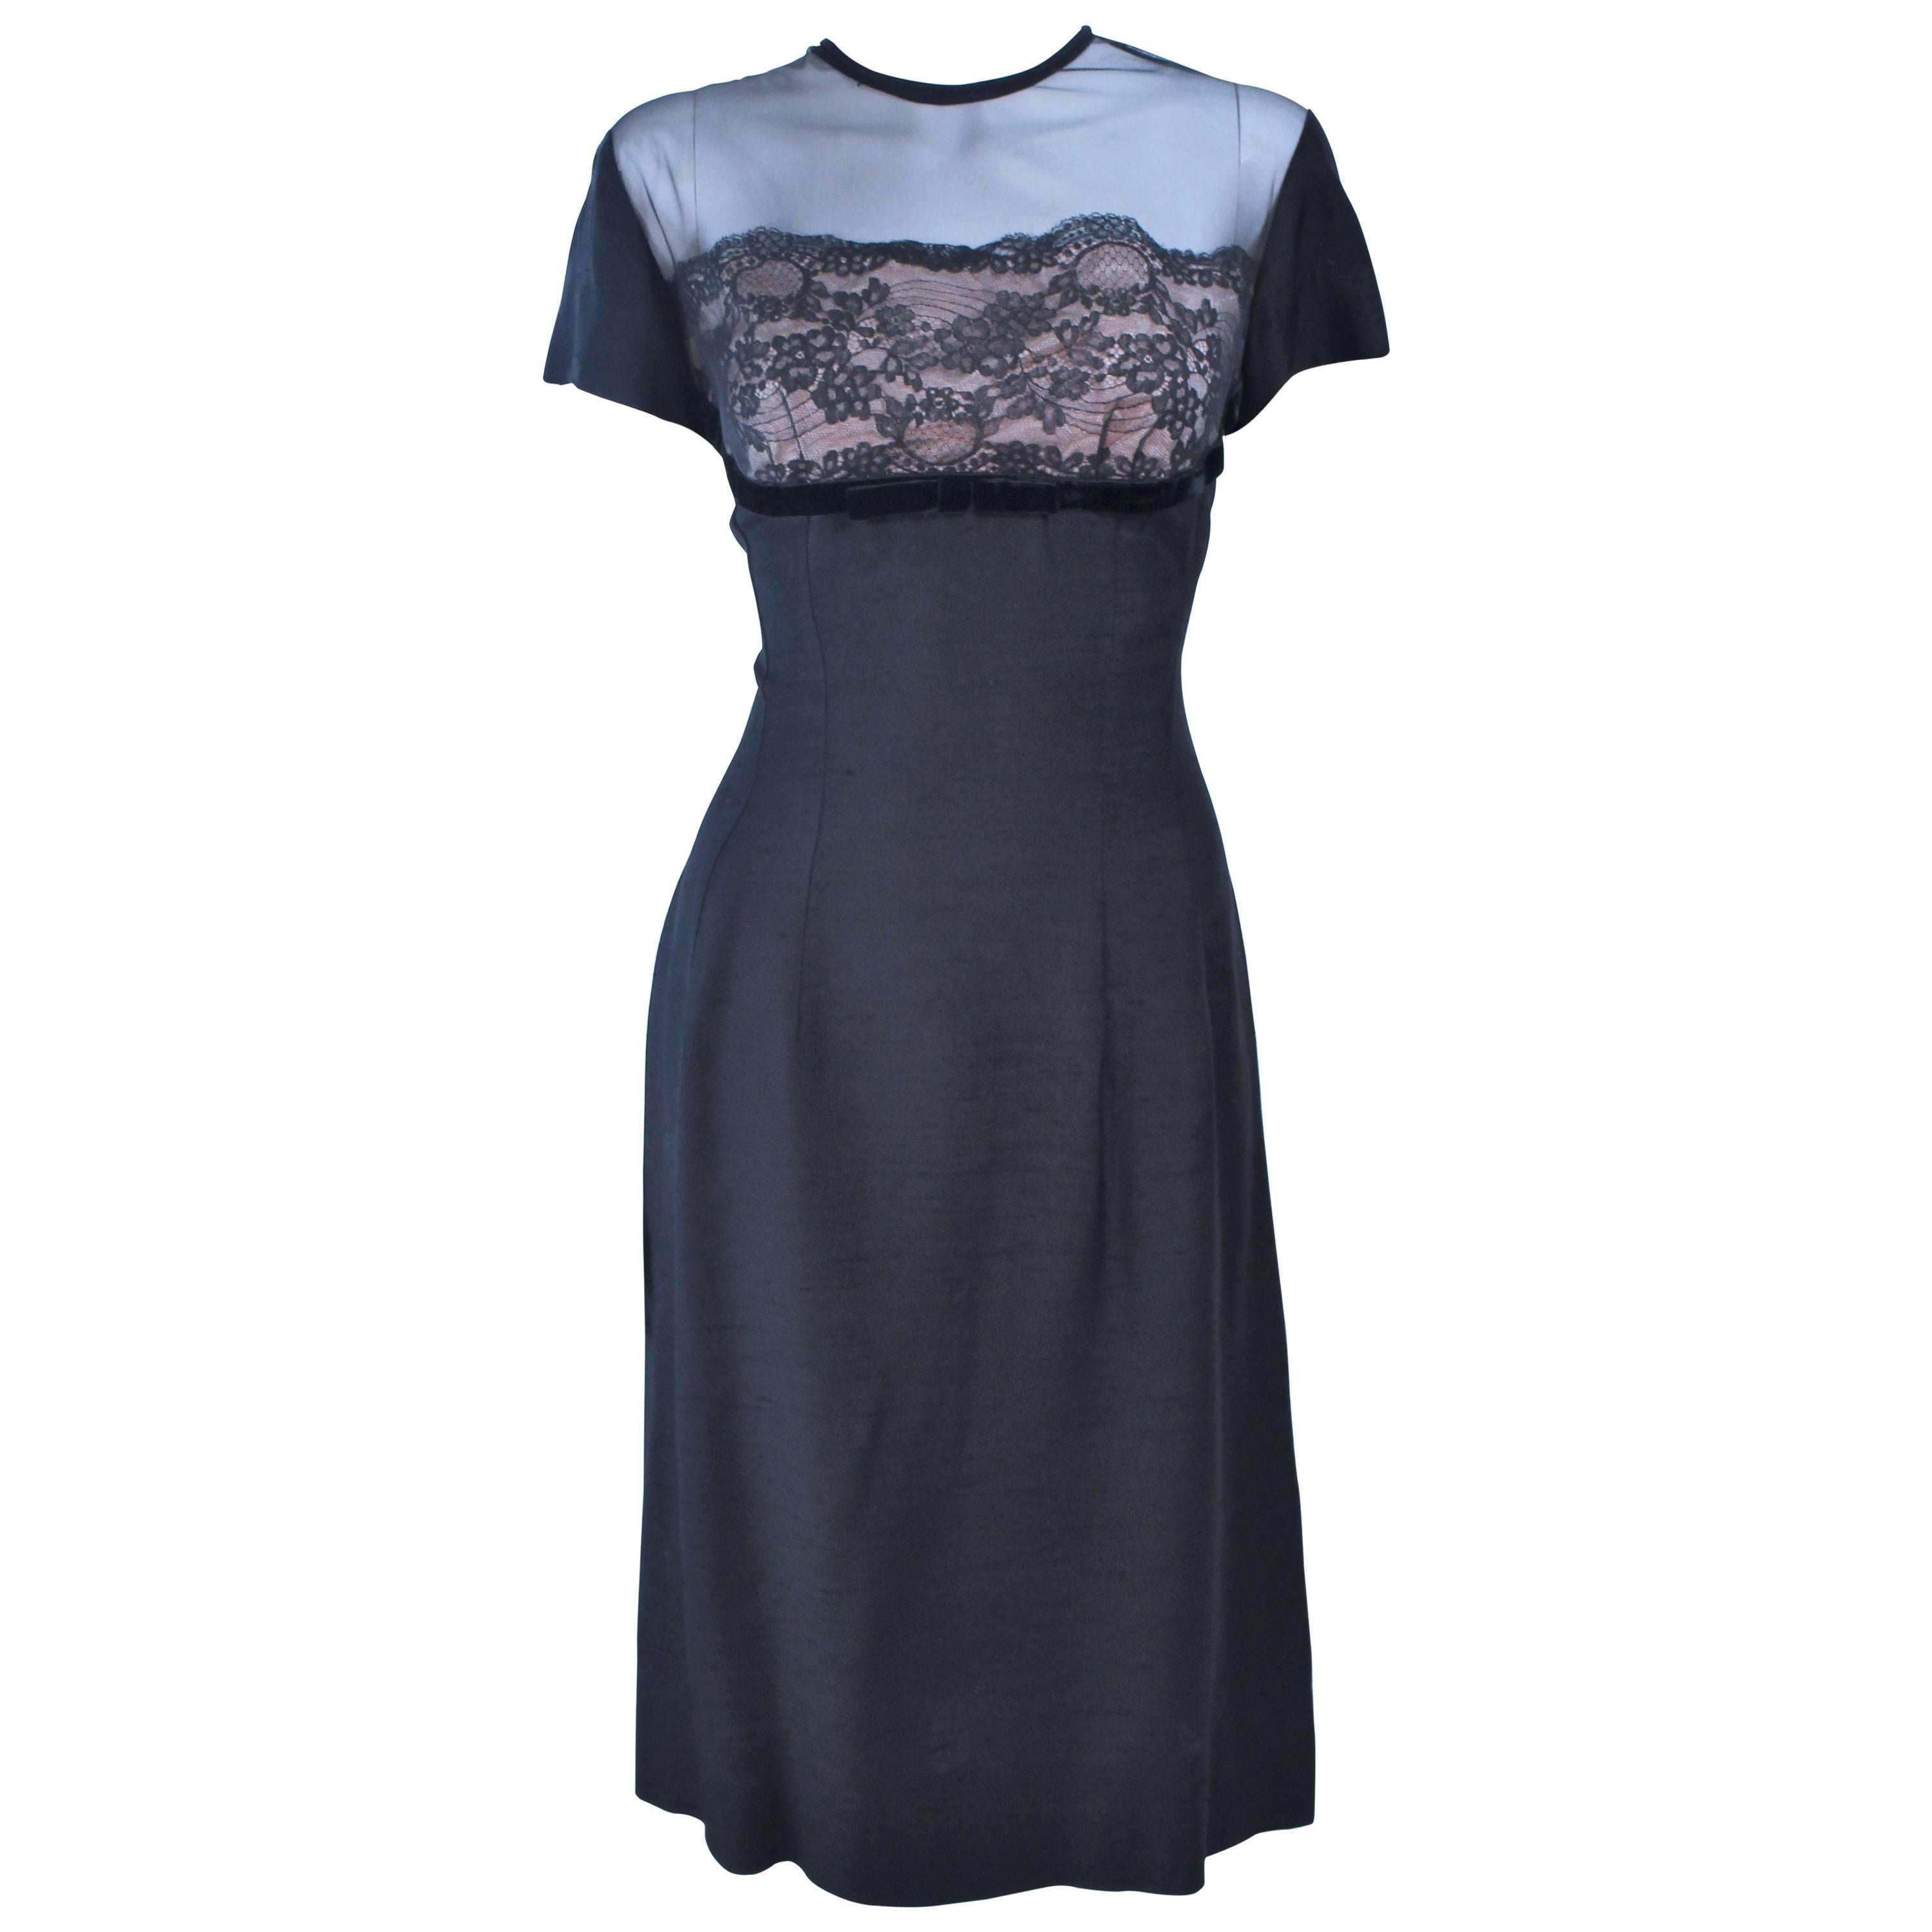 J. HARLAN Black Silk and Lace Cocktail Dress with Sheer Details Size 8 For Sale